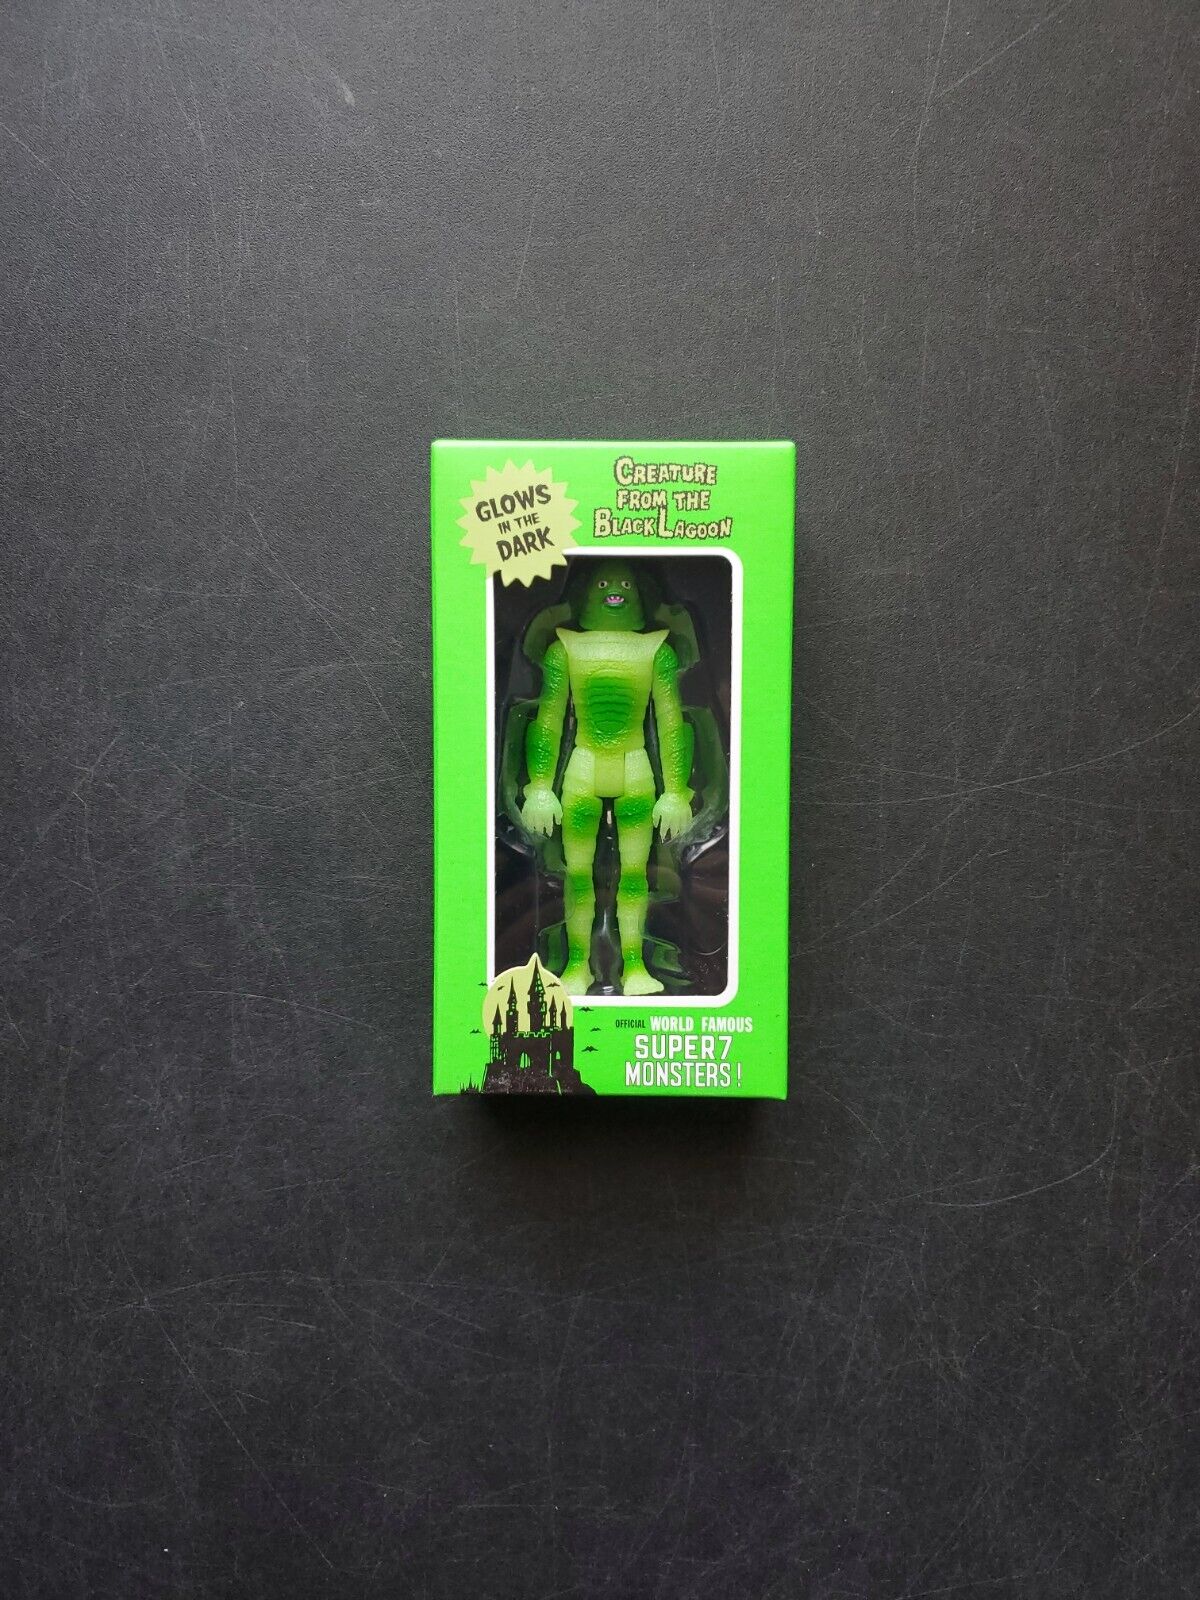 Super7 Universal Monsters Creature From The Black Lagoon (Glow in the Dark) Super7